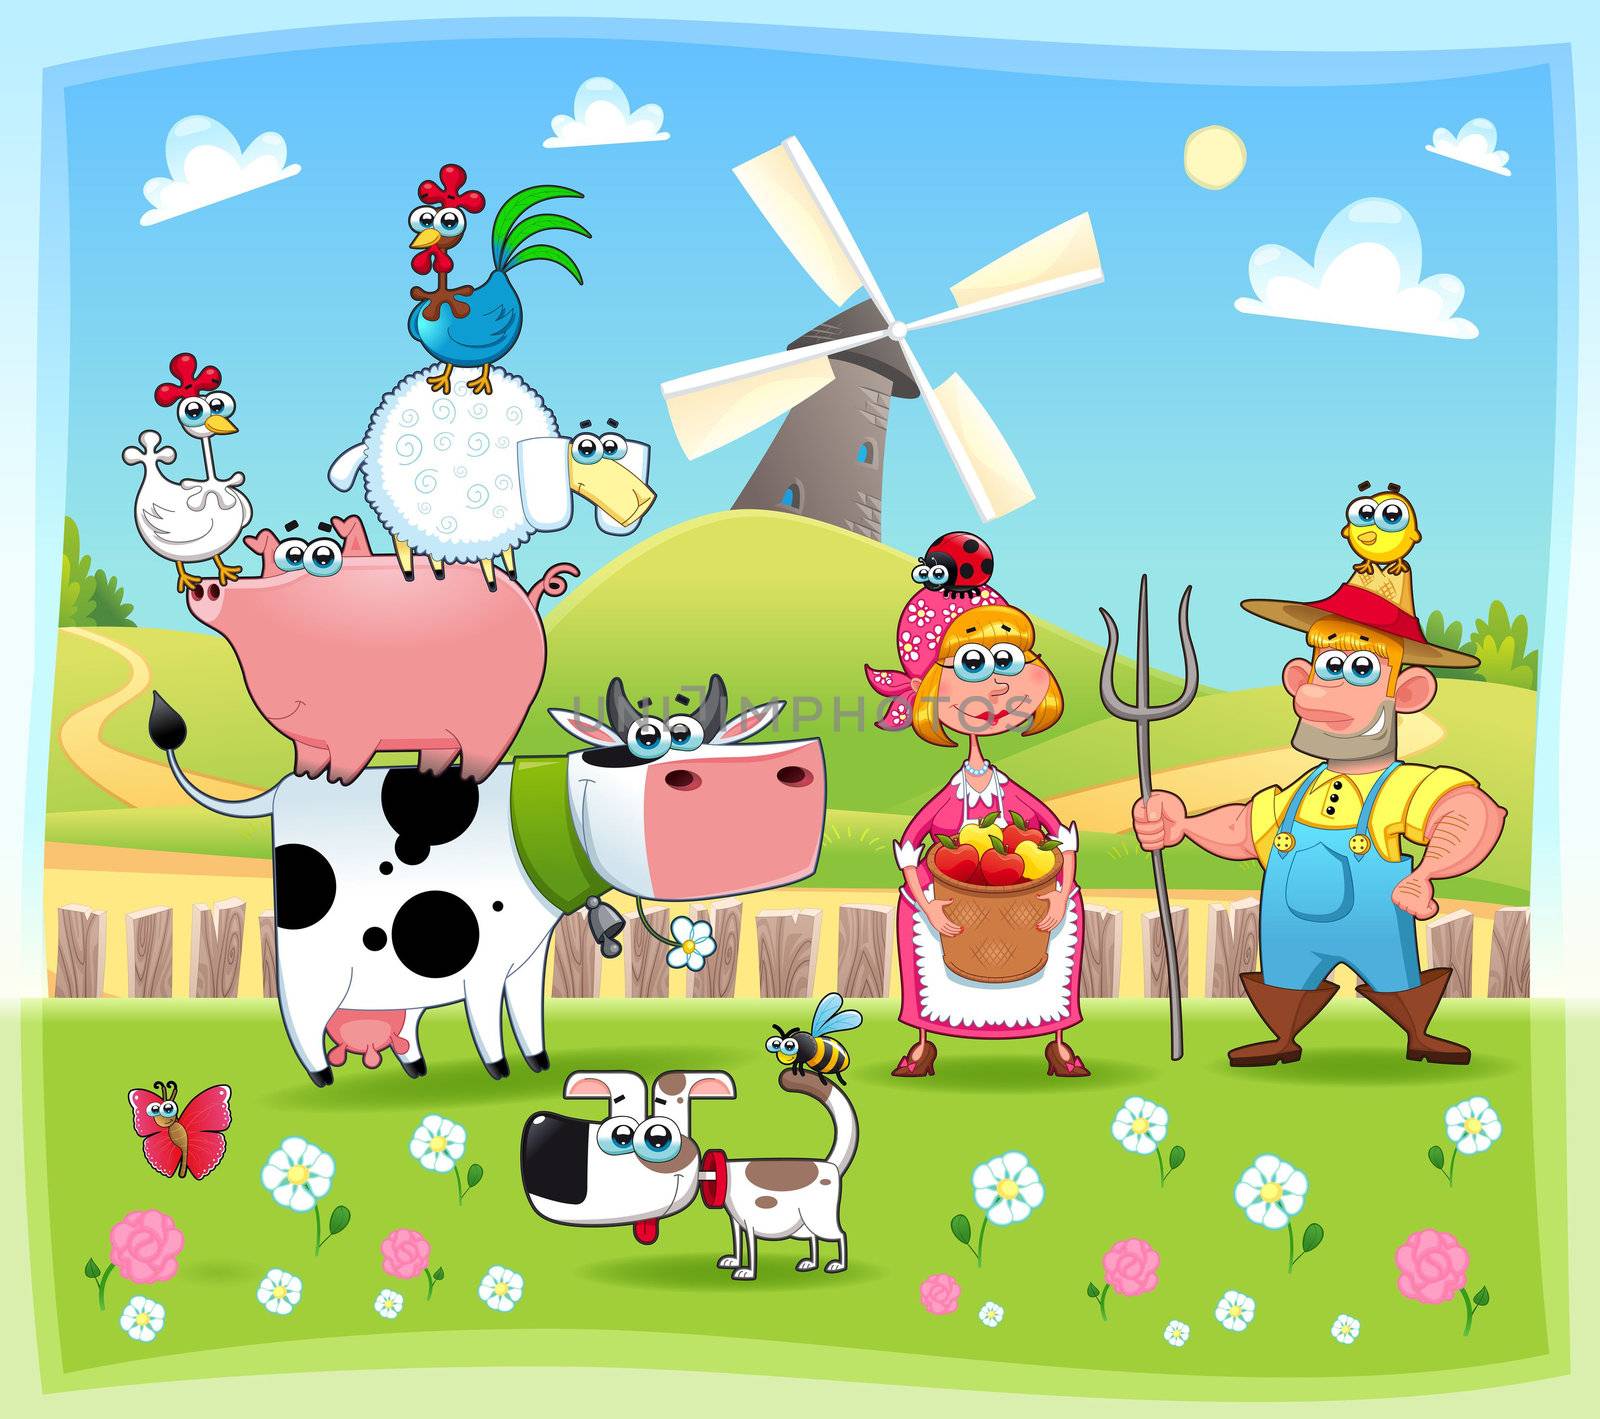 Funny farm family. Cartoon and vector illustration. Eps file contains isolated objects and characters. Funny farm family. Cartoon and vector illustration. Eps file contains isolated objects and characters.

